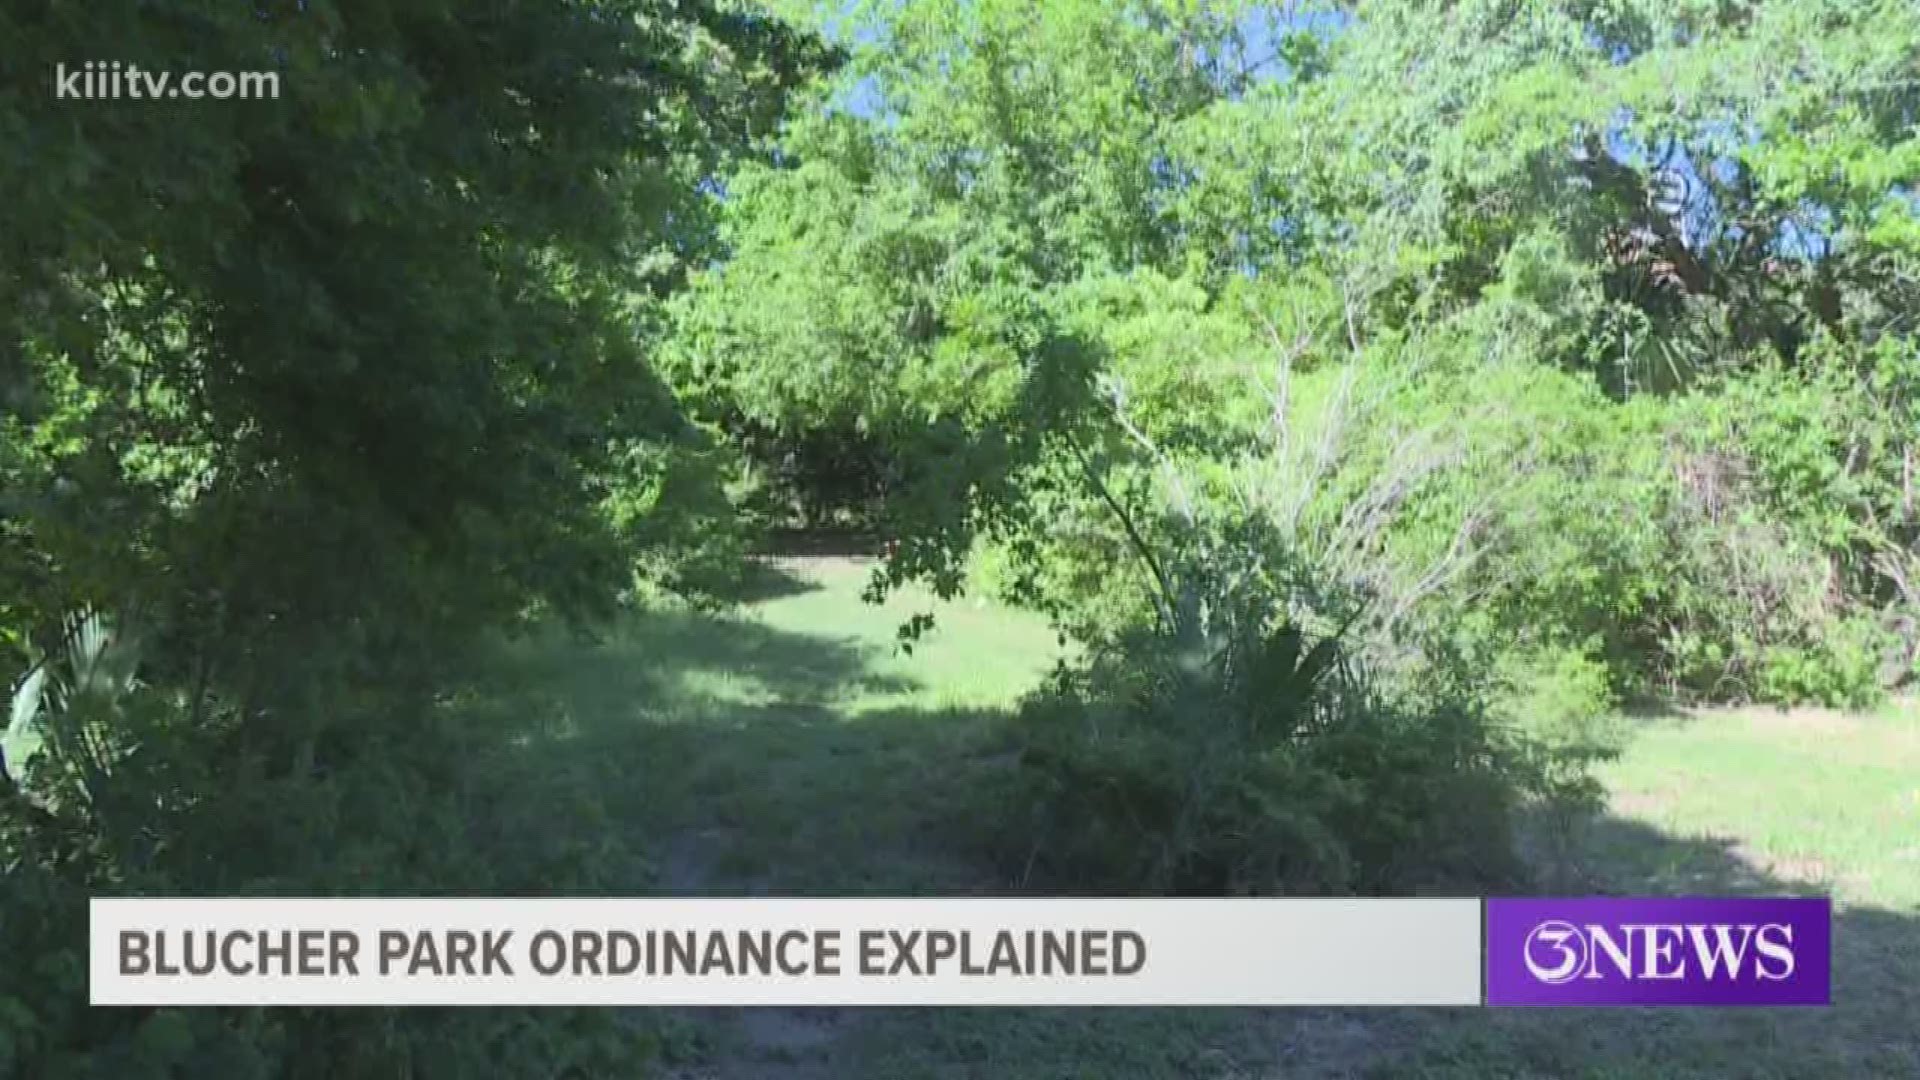 The ordinance was first presented last week and some residents said it's problematic.